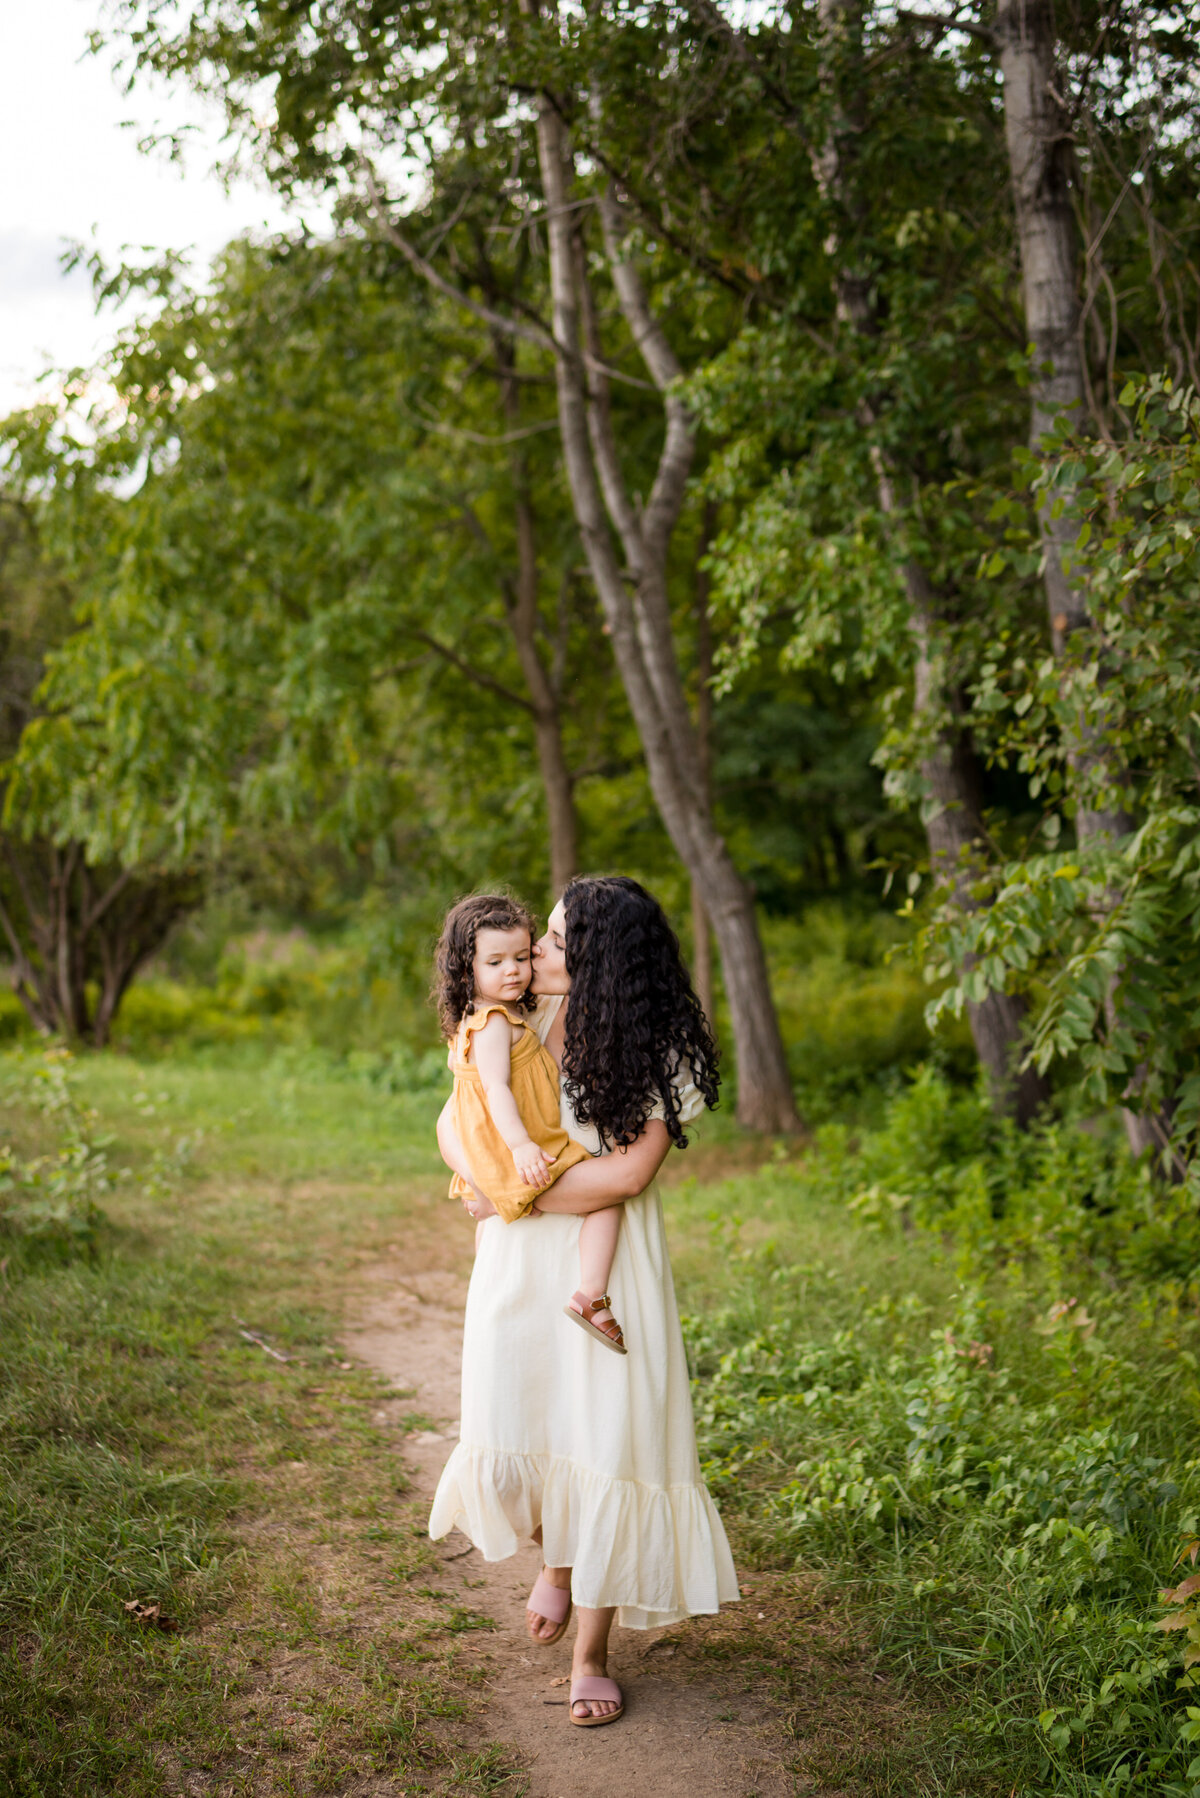 Boston-family-photographer-bella-wang-photography-Lifestyle-session-outdoor-wildflower-94